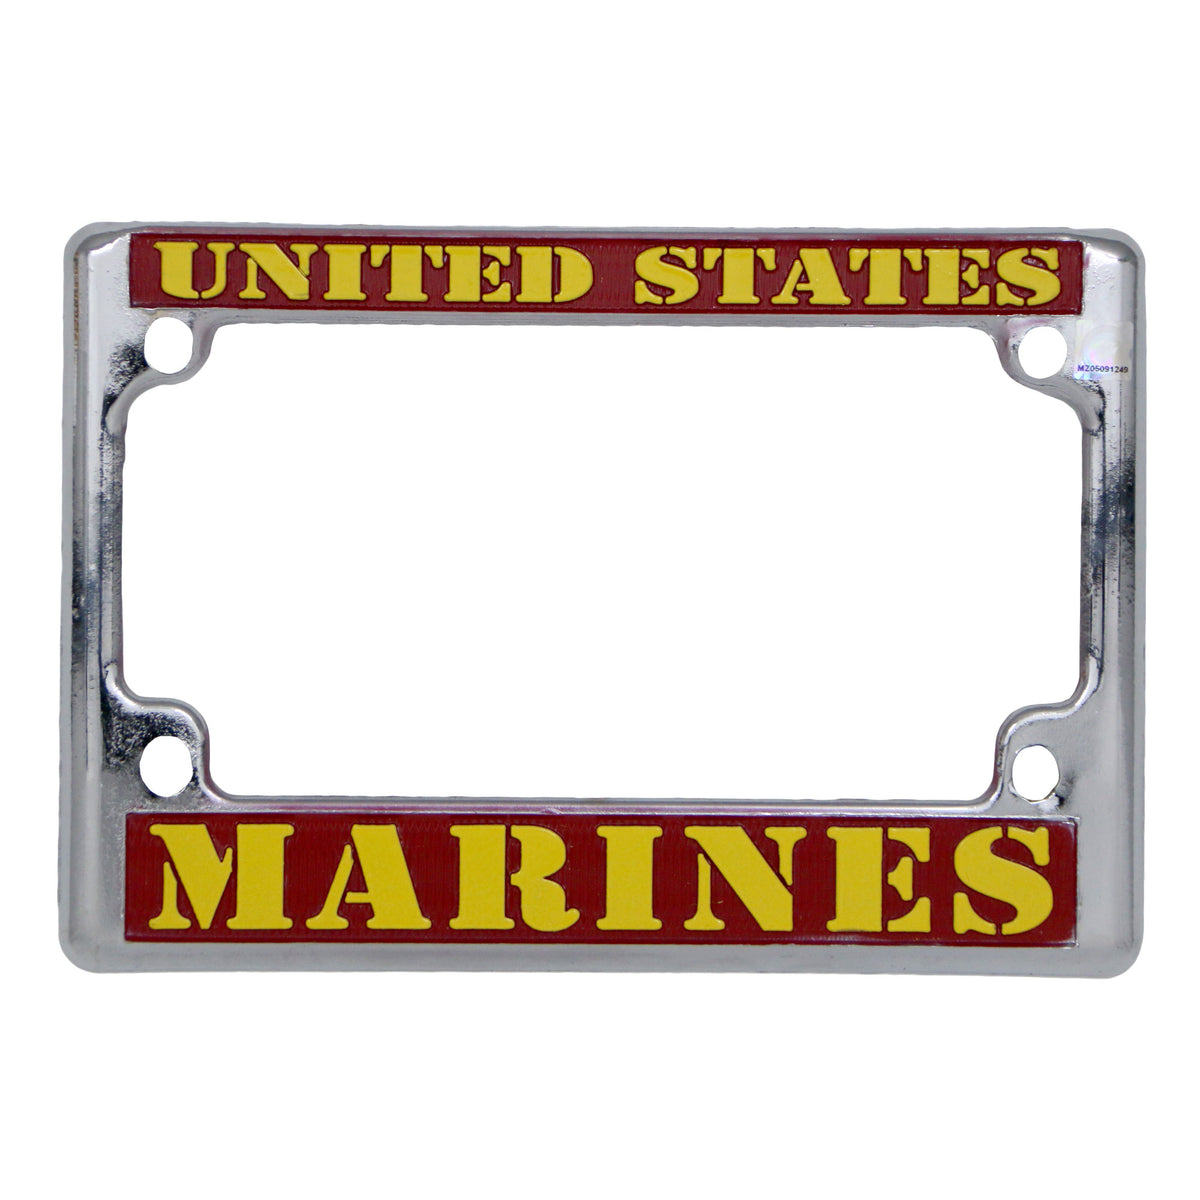 Hot Leathers United States Marines License Plate Frame